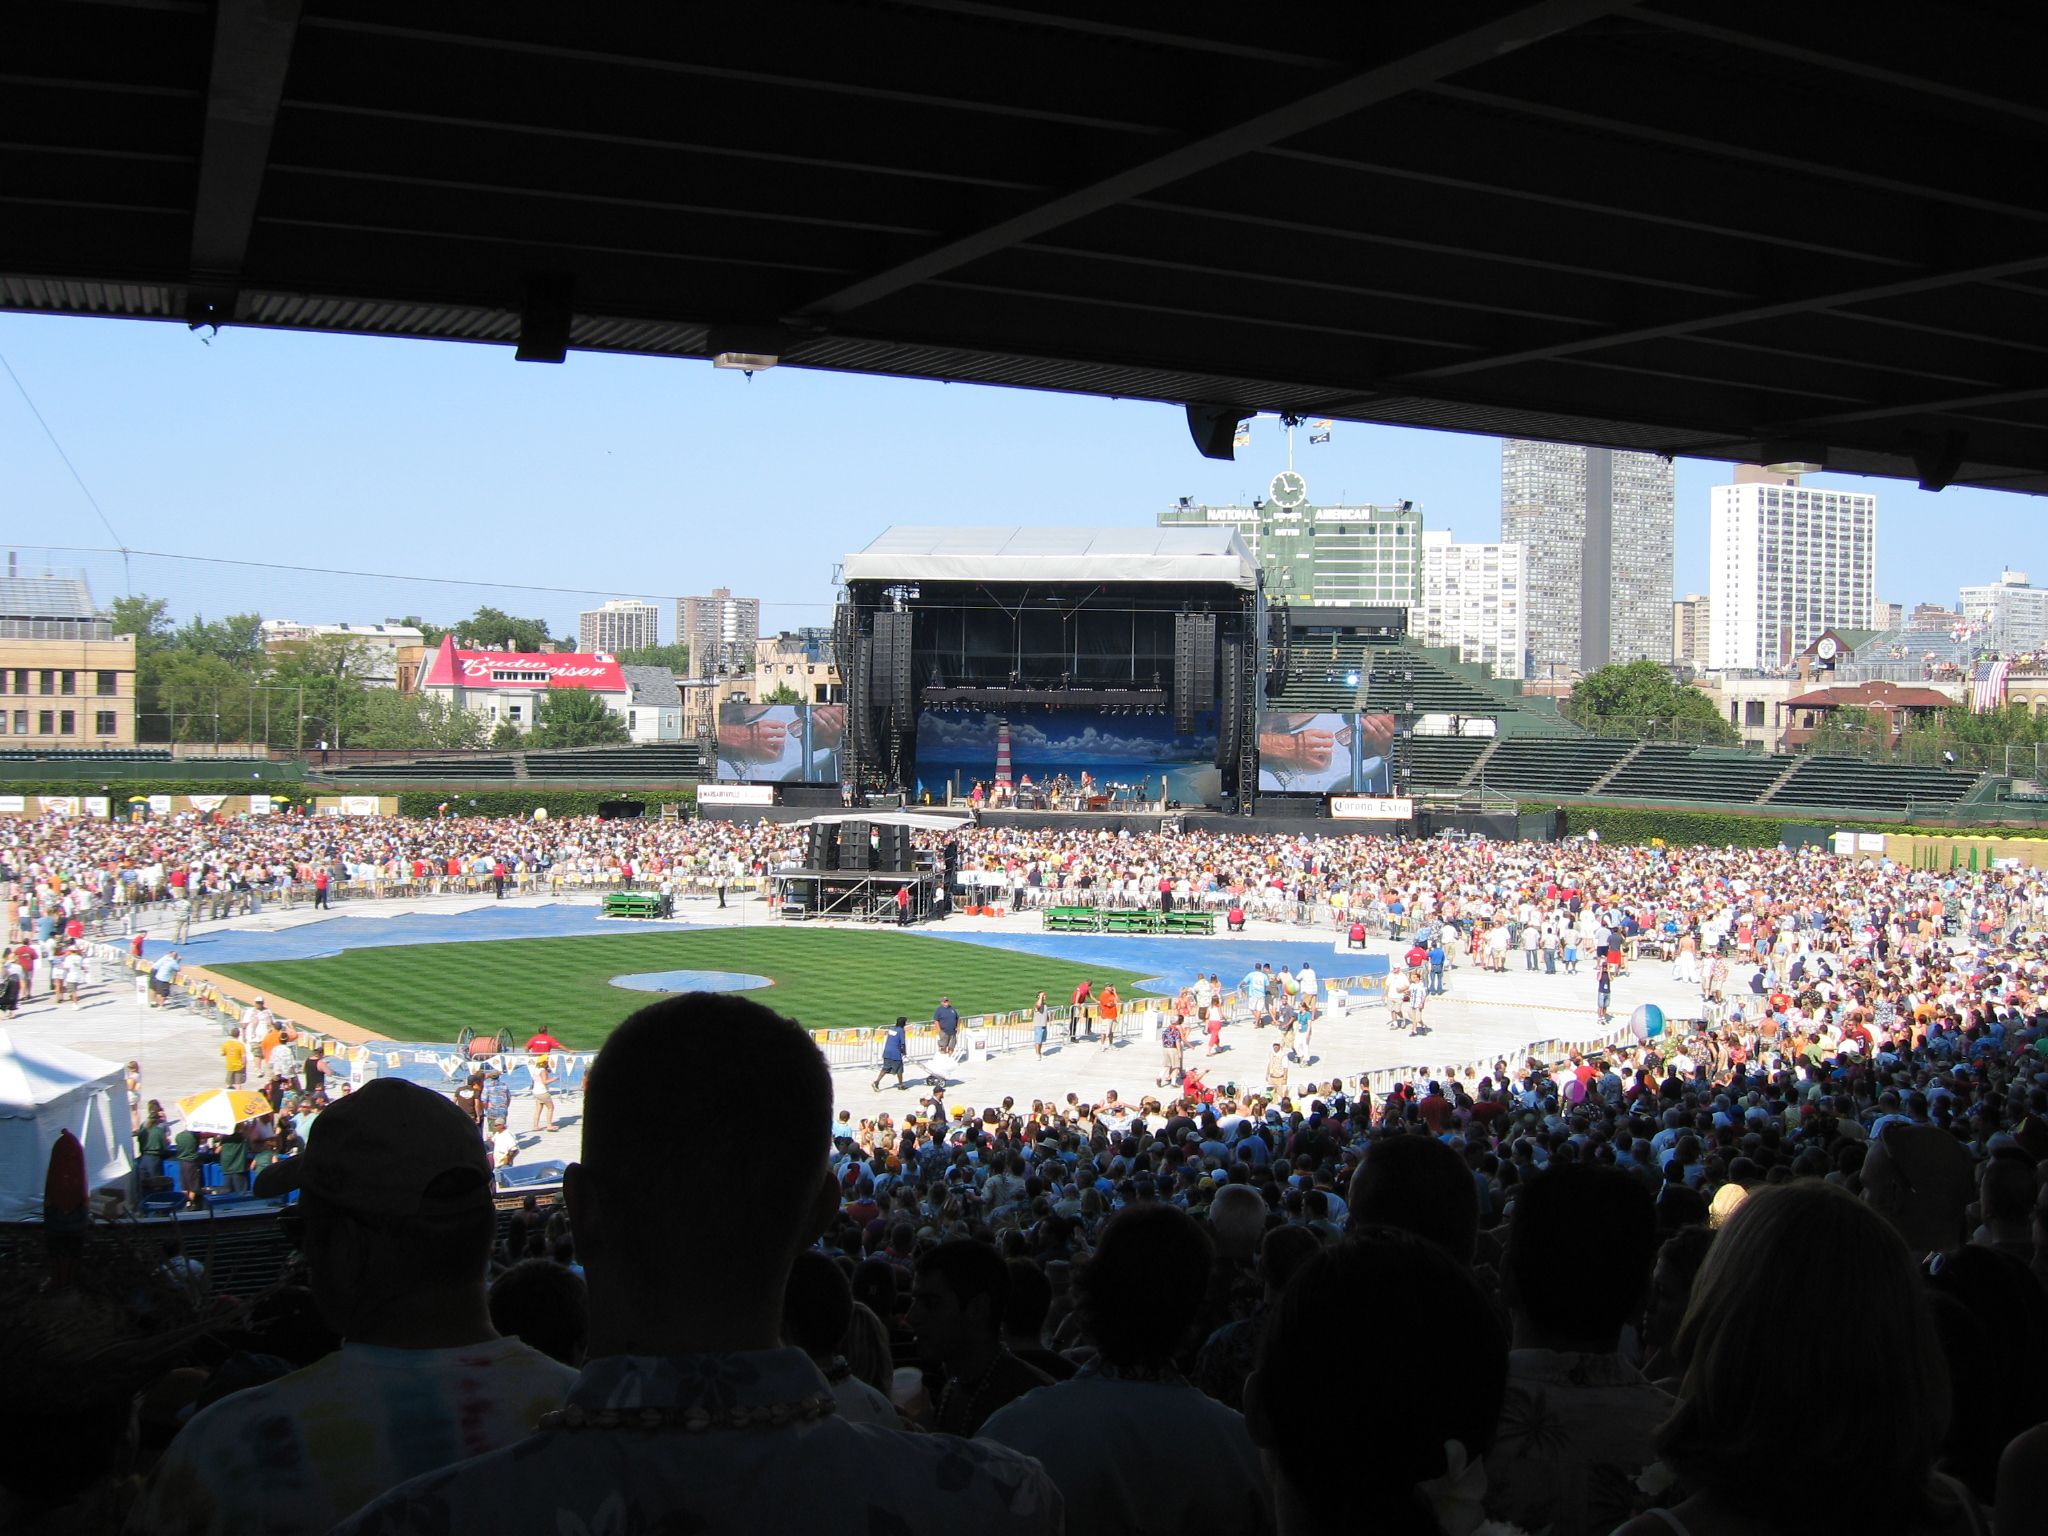 head-on concert view at Wrigley Field